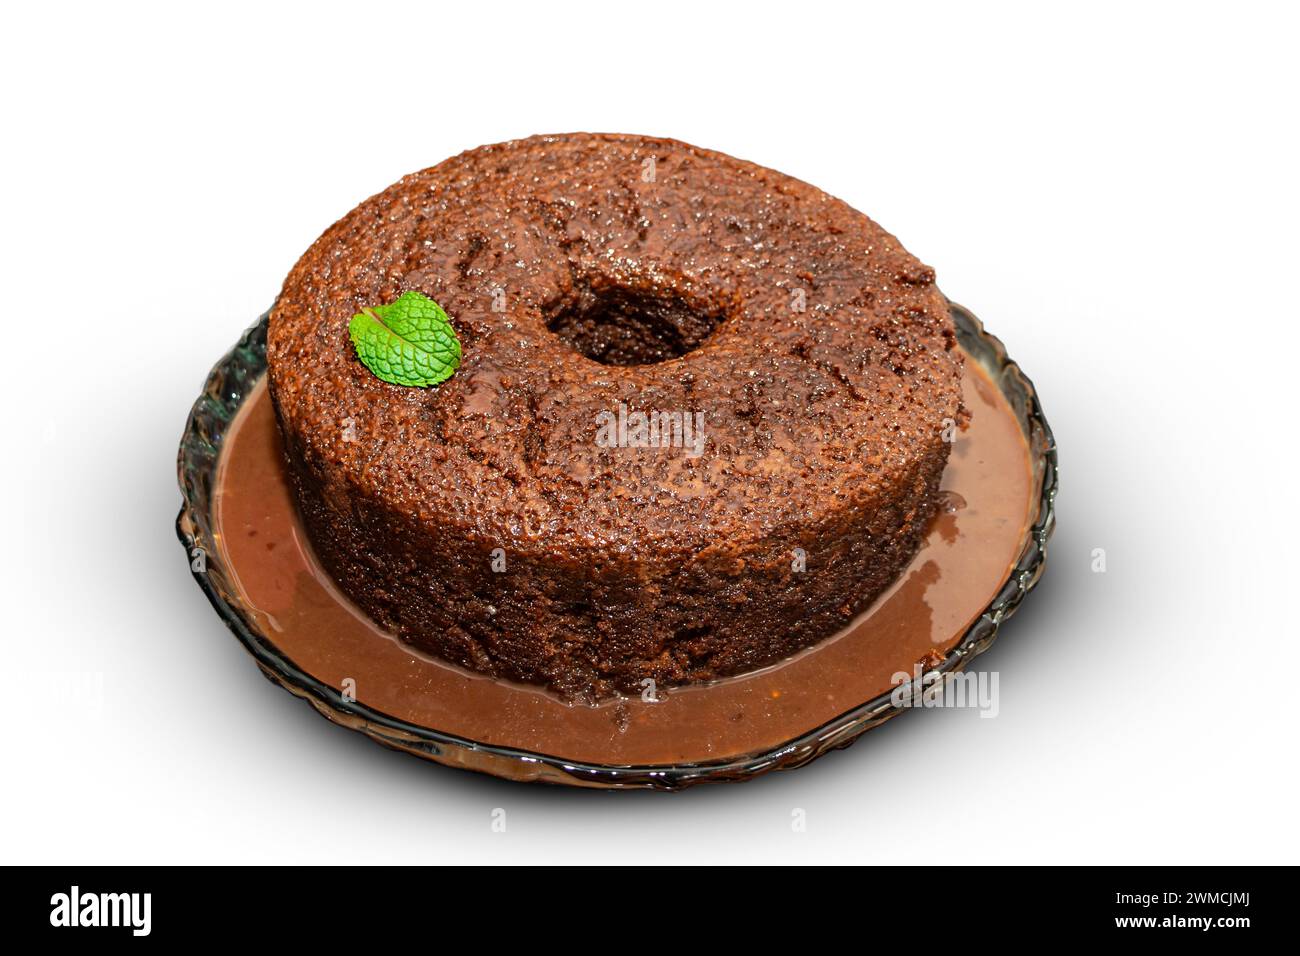 A chocolate cake isolated on a white background Stock Photo